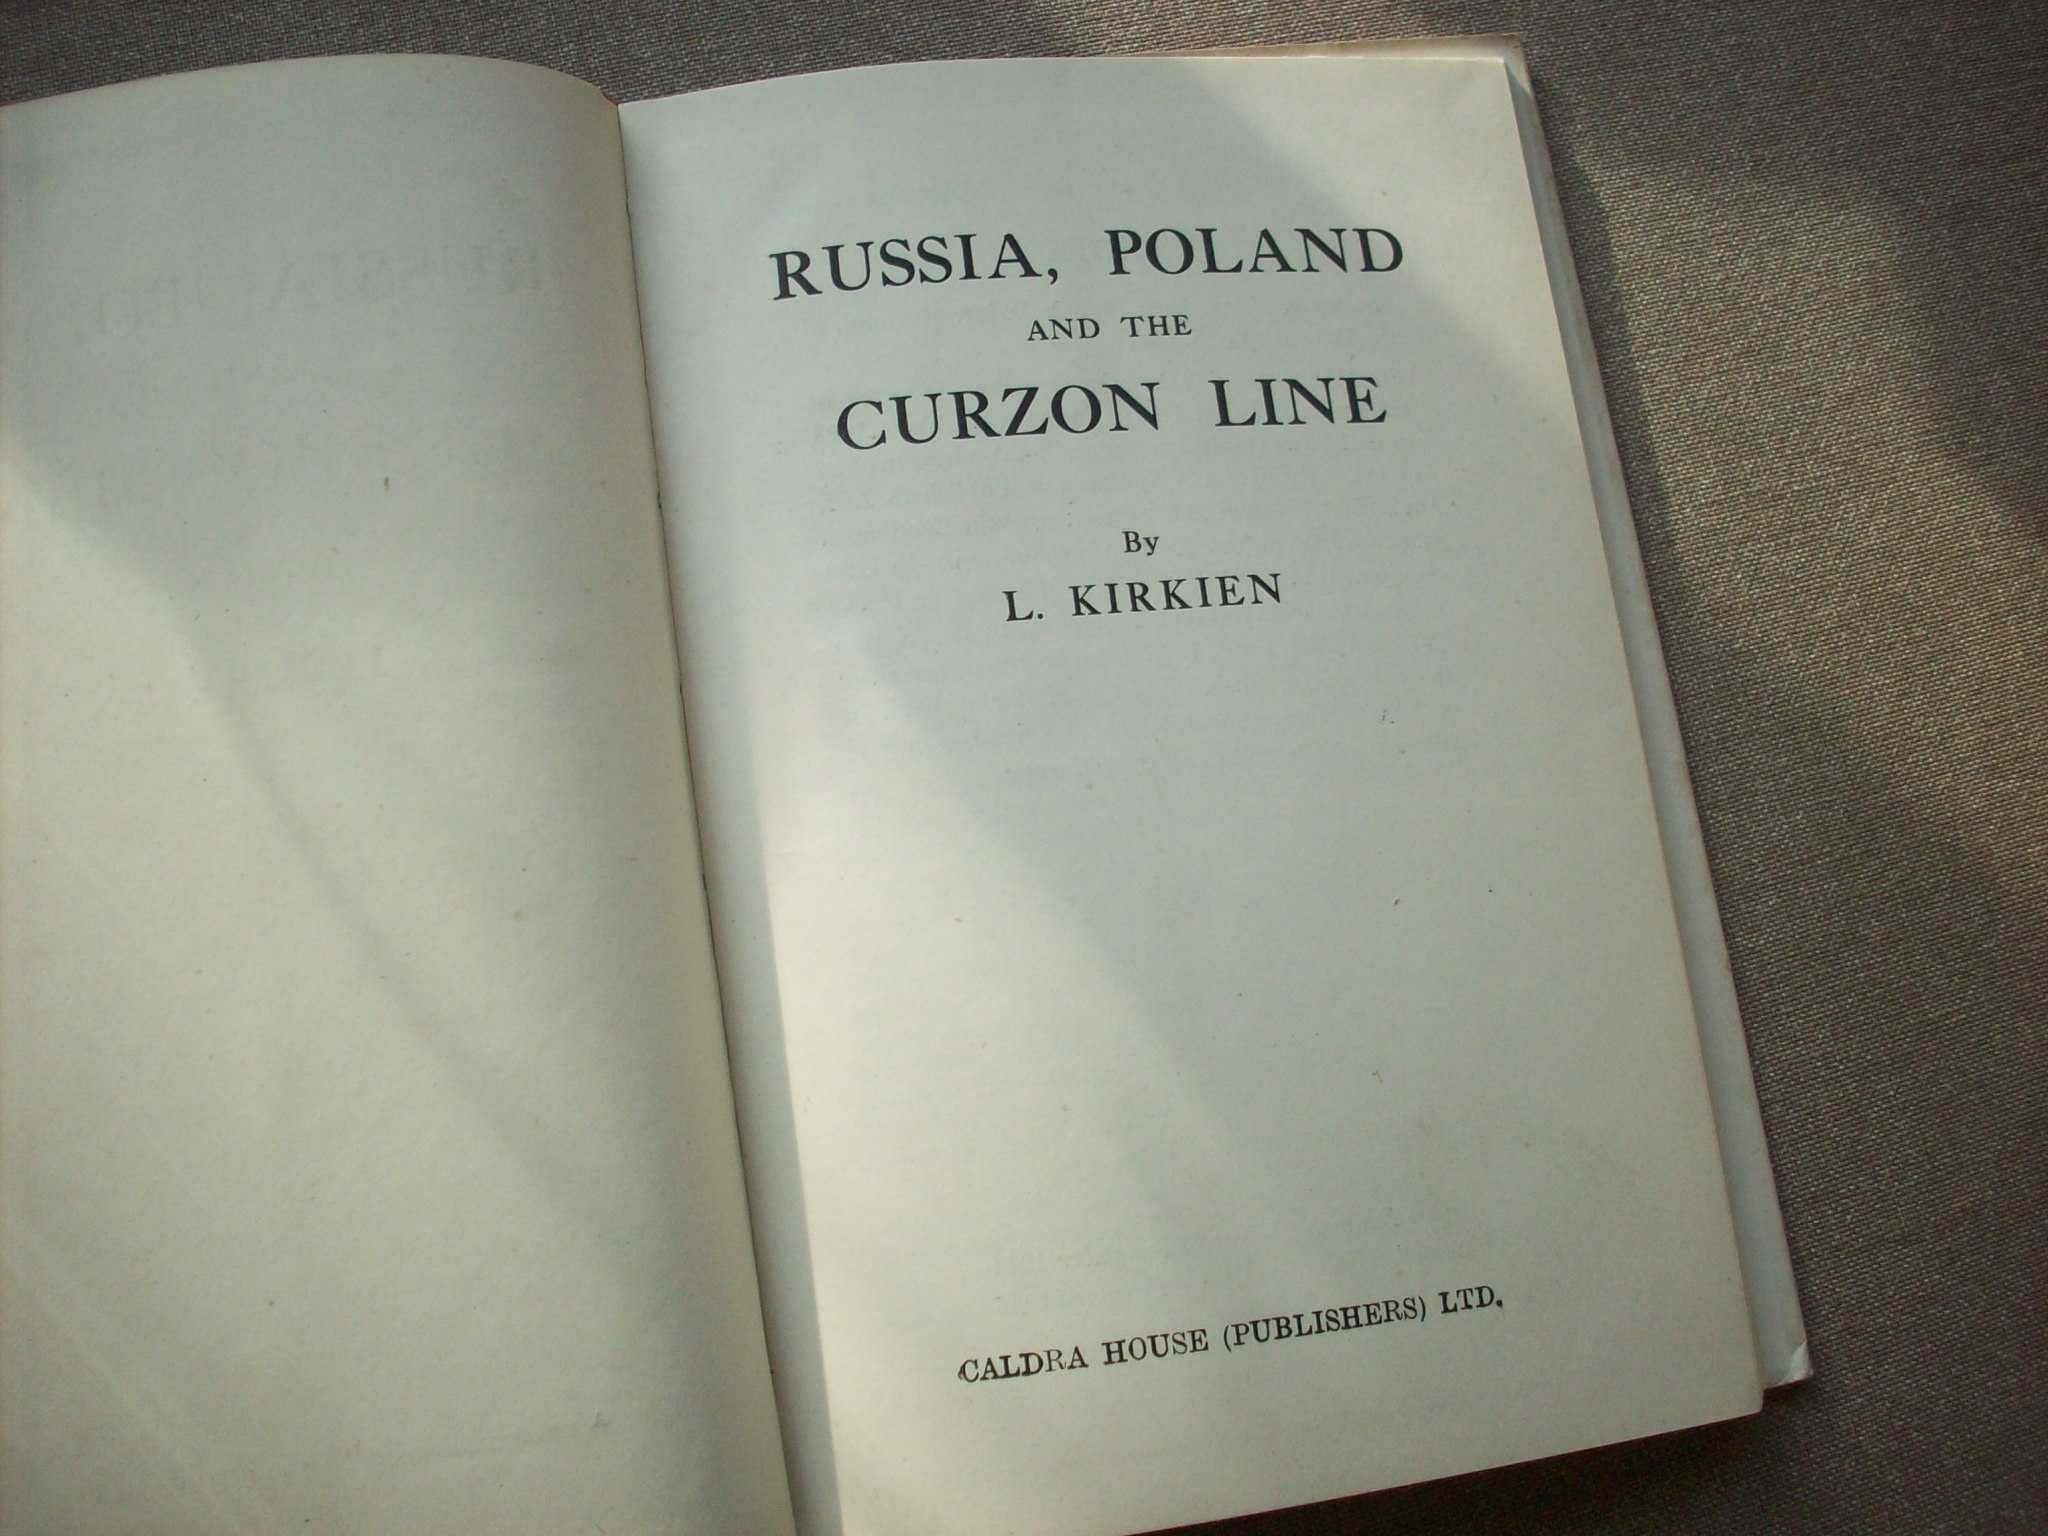 Russia, Poland and the Curzon Line, L.Kirkien, 1945.